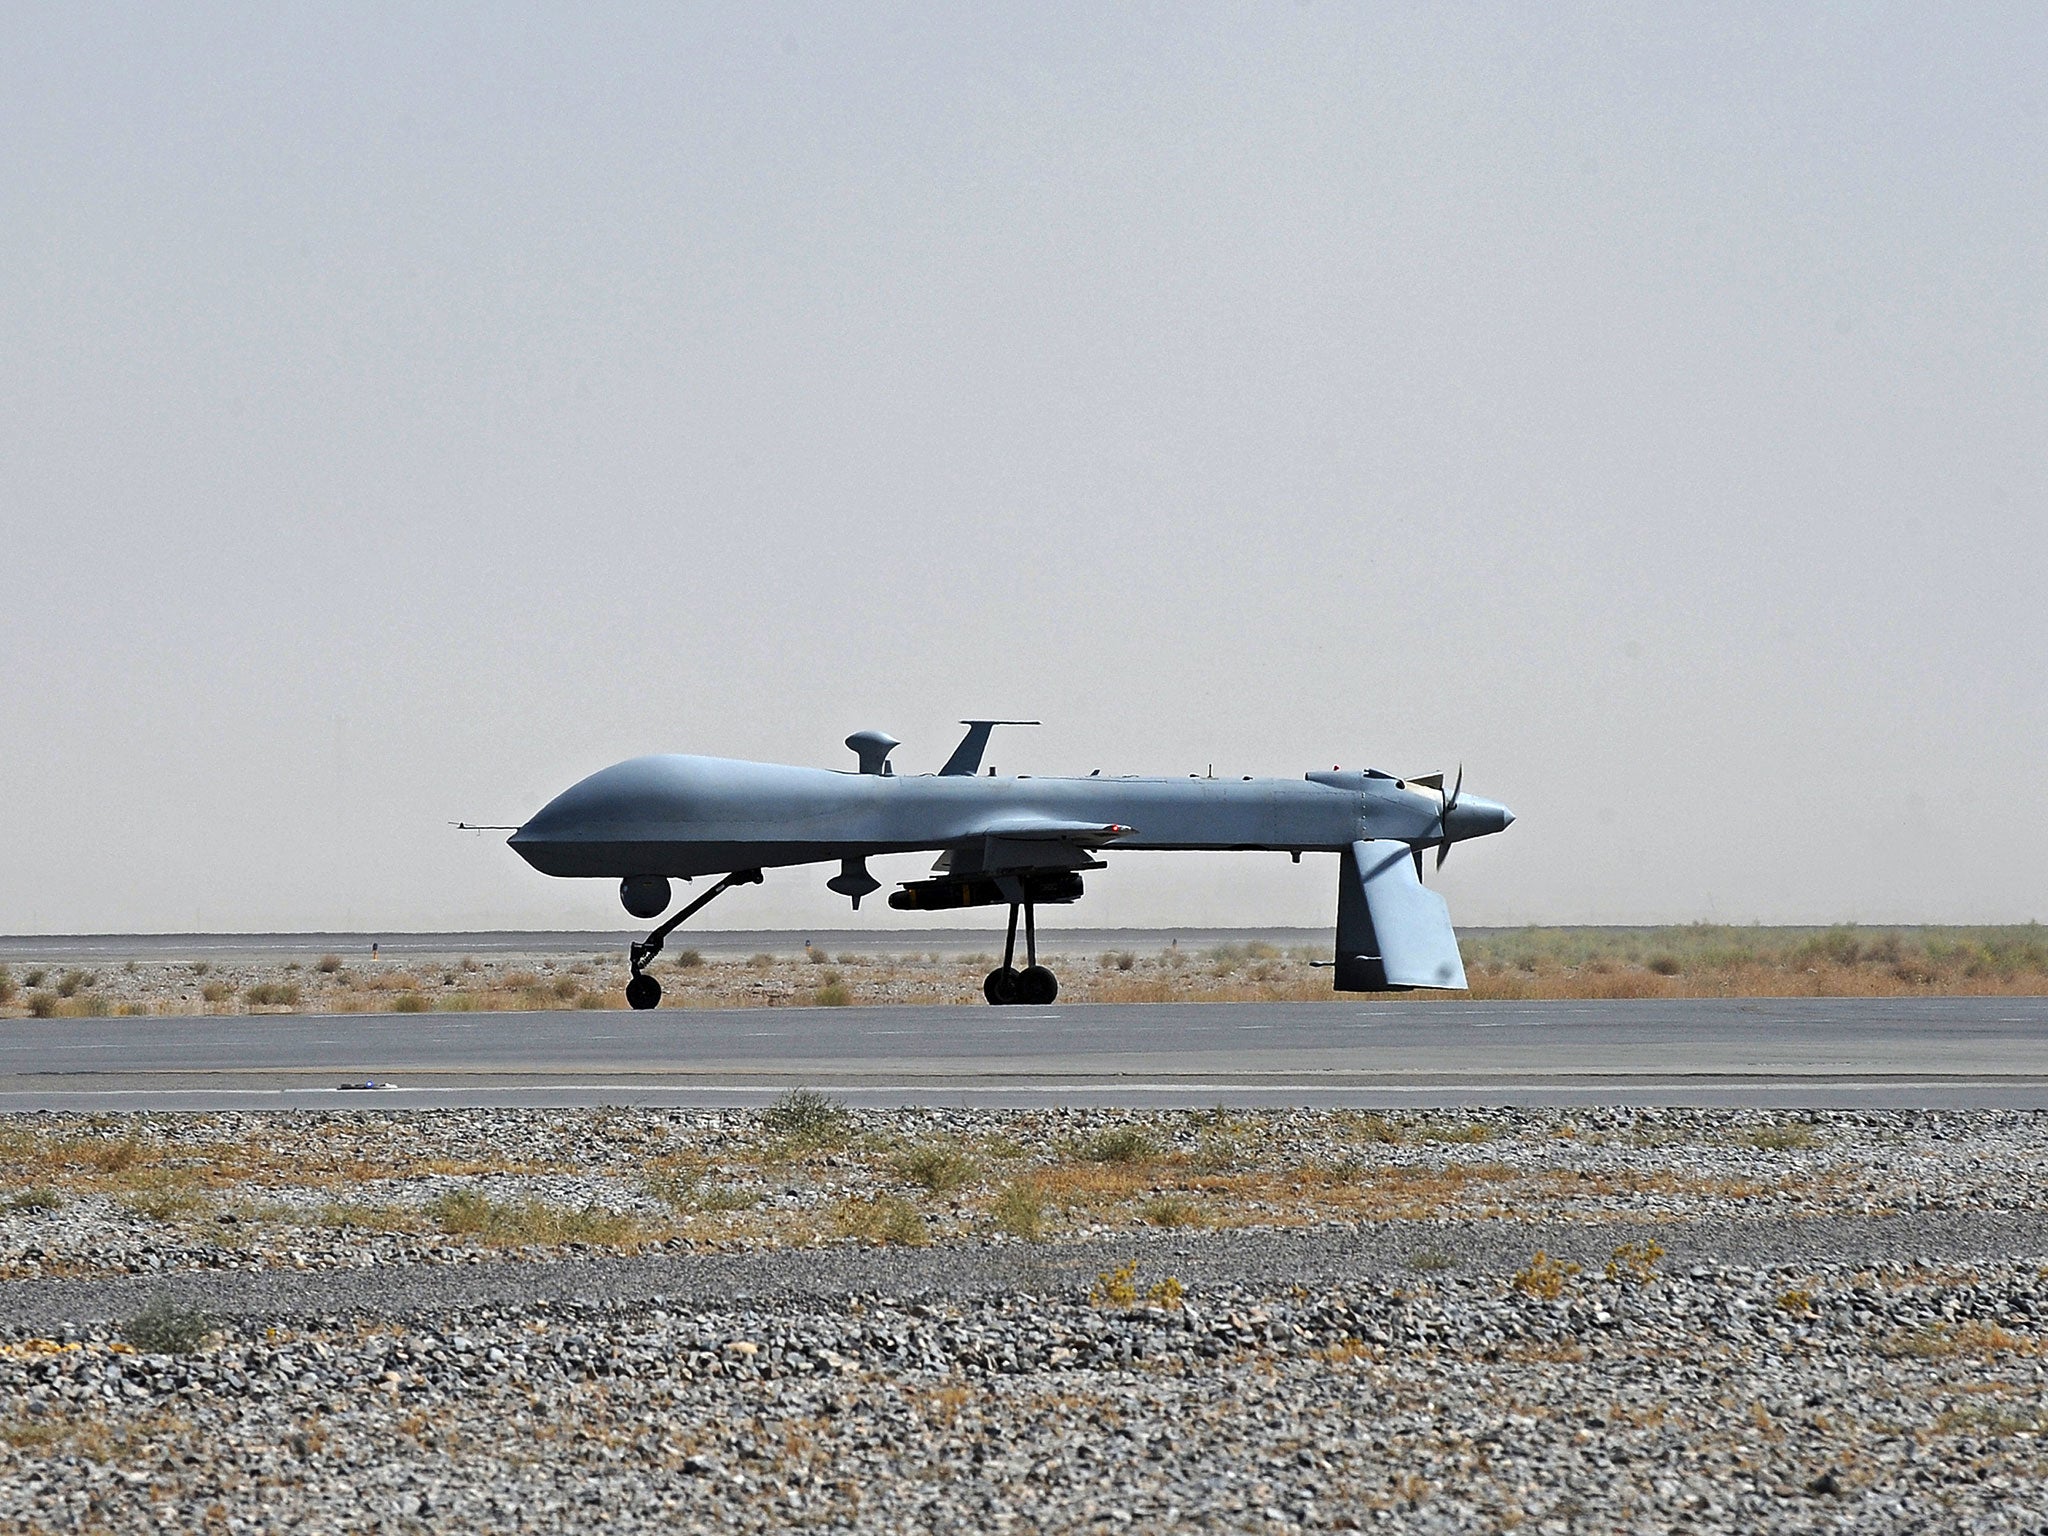 The drone strikes followed reports that civilians were being attacked by insurgents